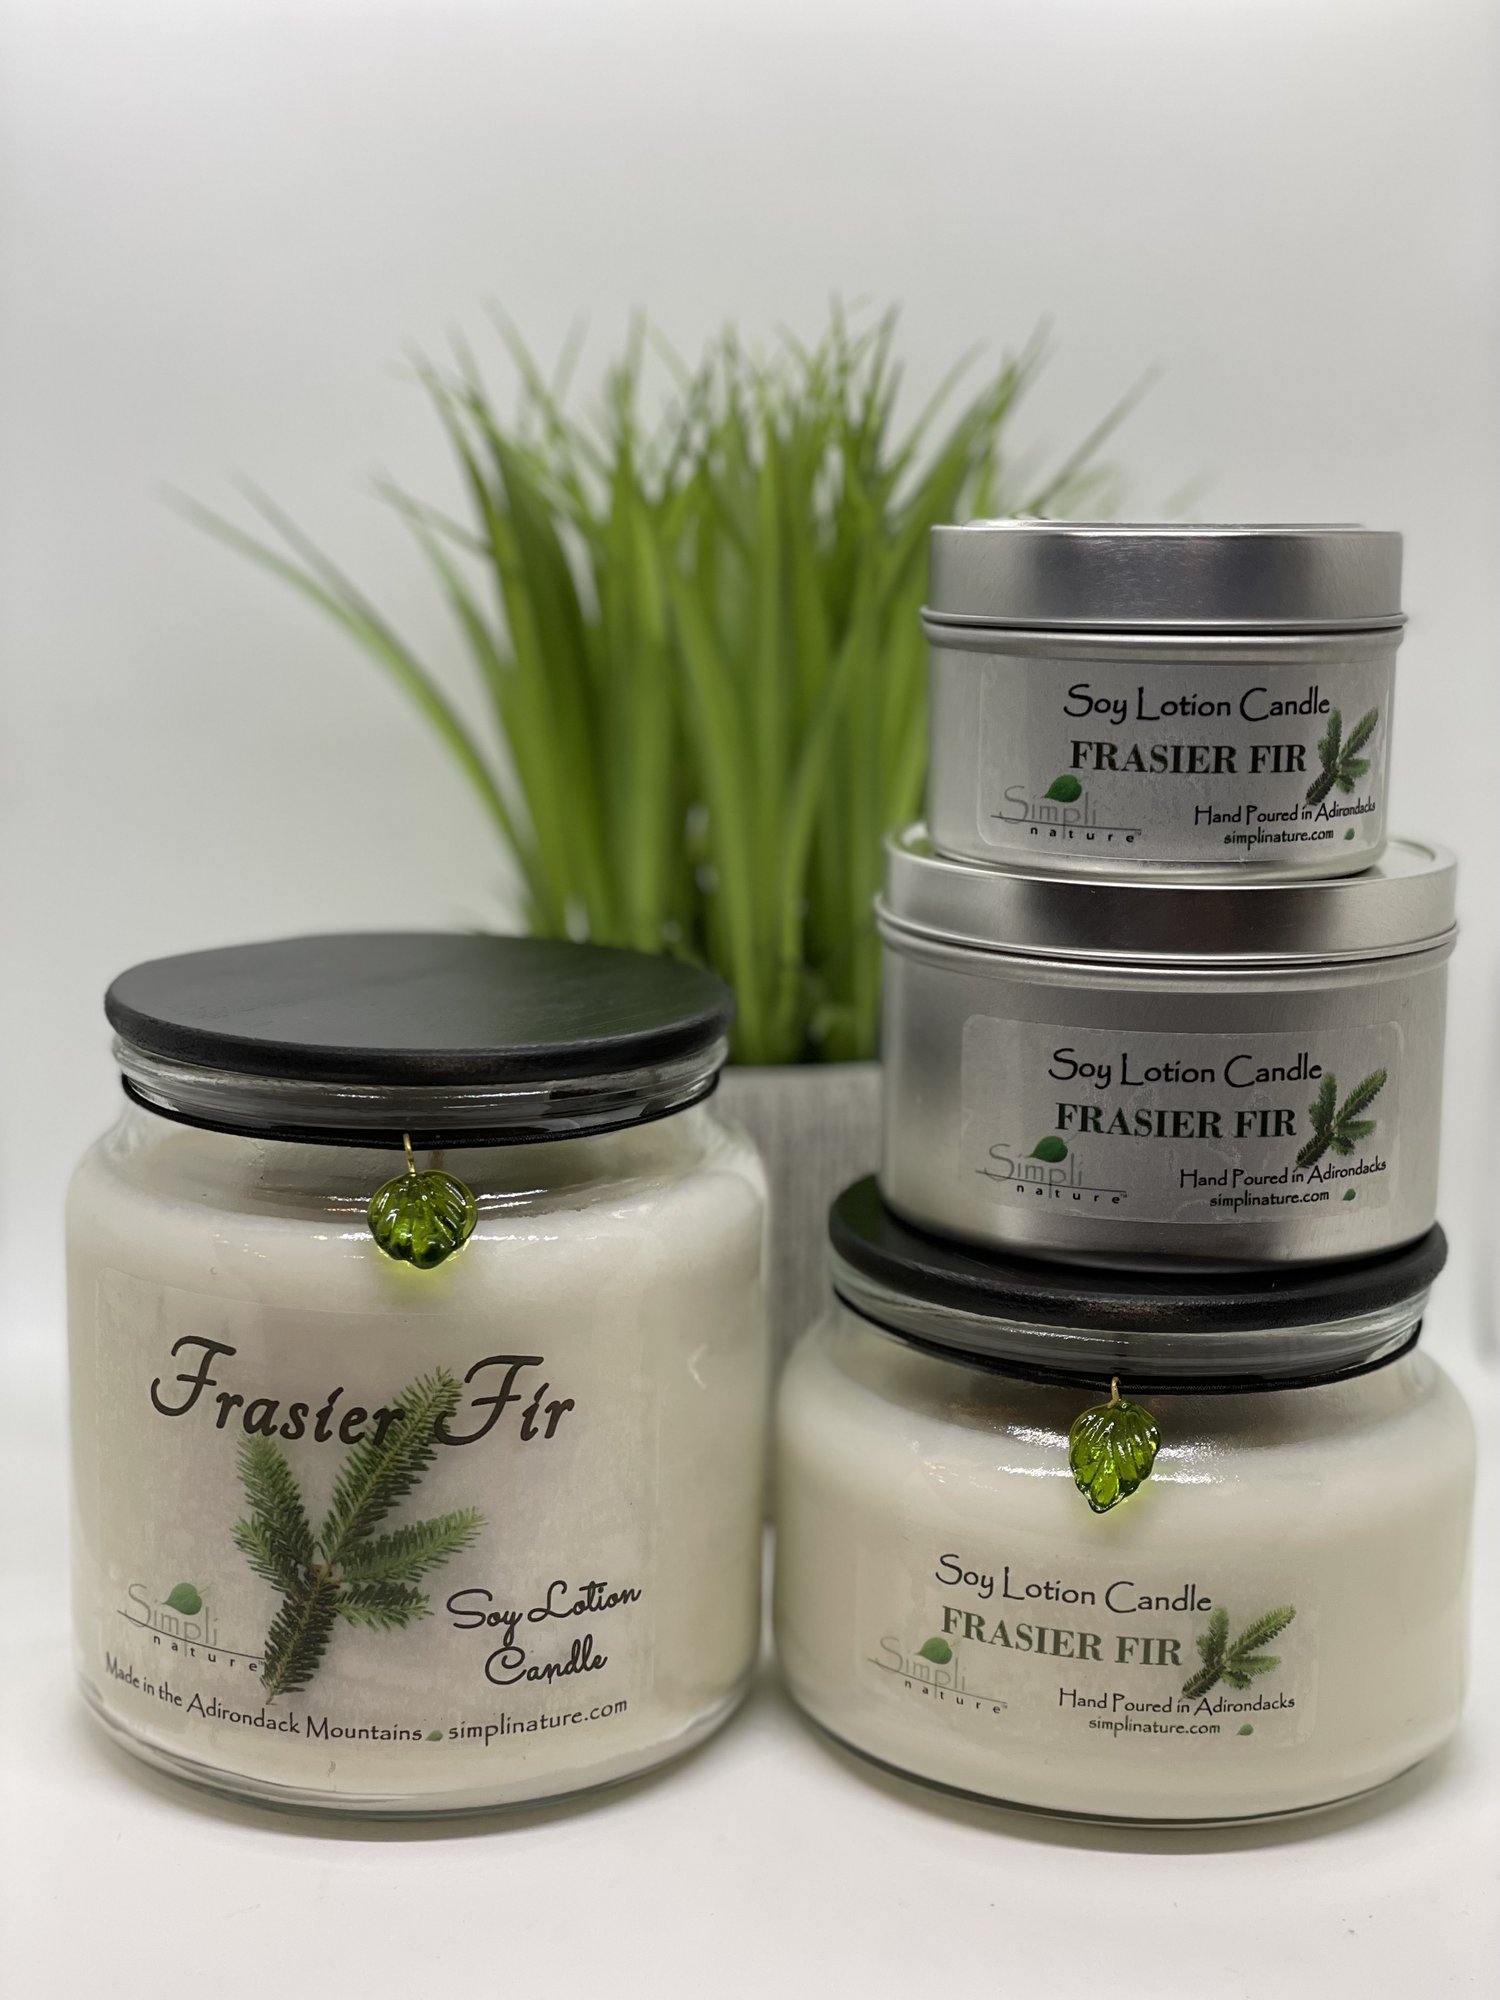 Frasier Fir — Simpli Nature All Natural Soy Lotion Candles Hand